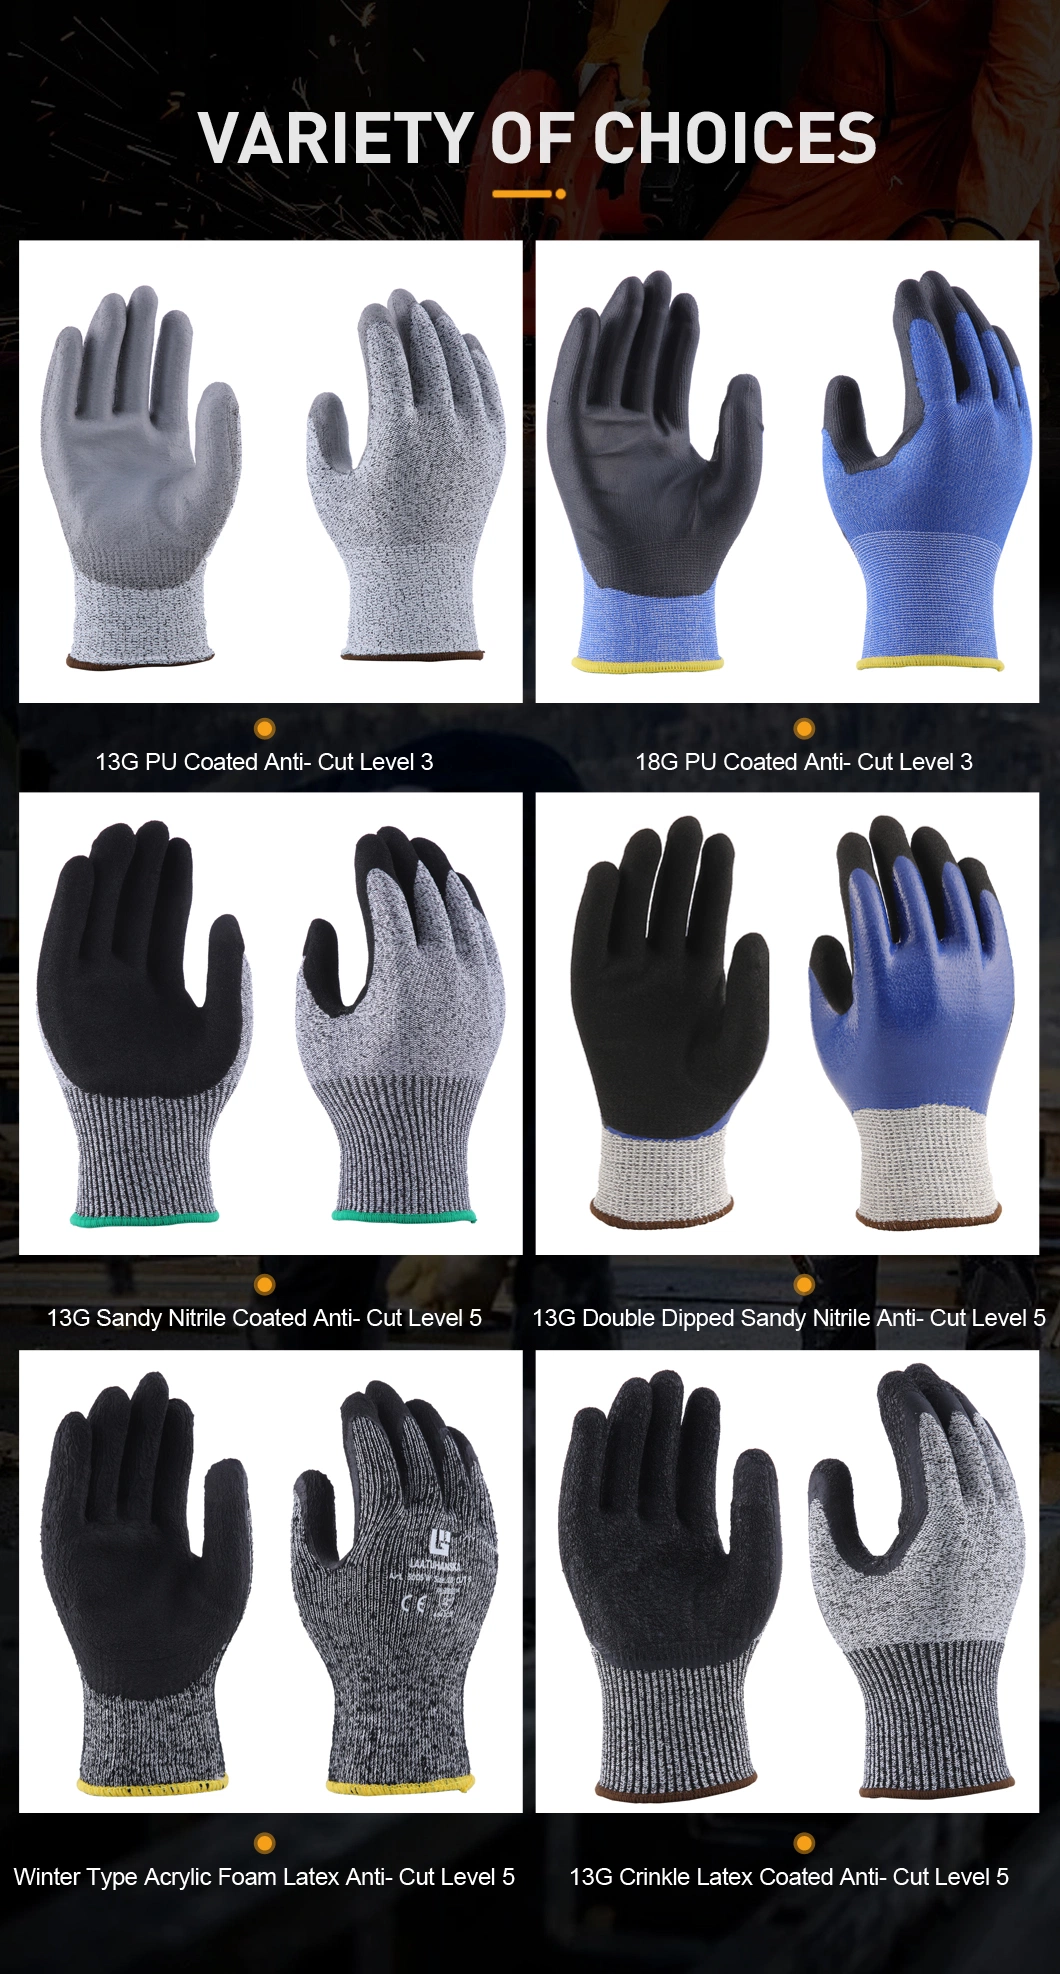 En388 Hppe Industrial Smooth Nitrile Coated Anti Cut Proof Cut Resistant Safety Work Glove